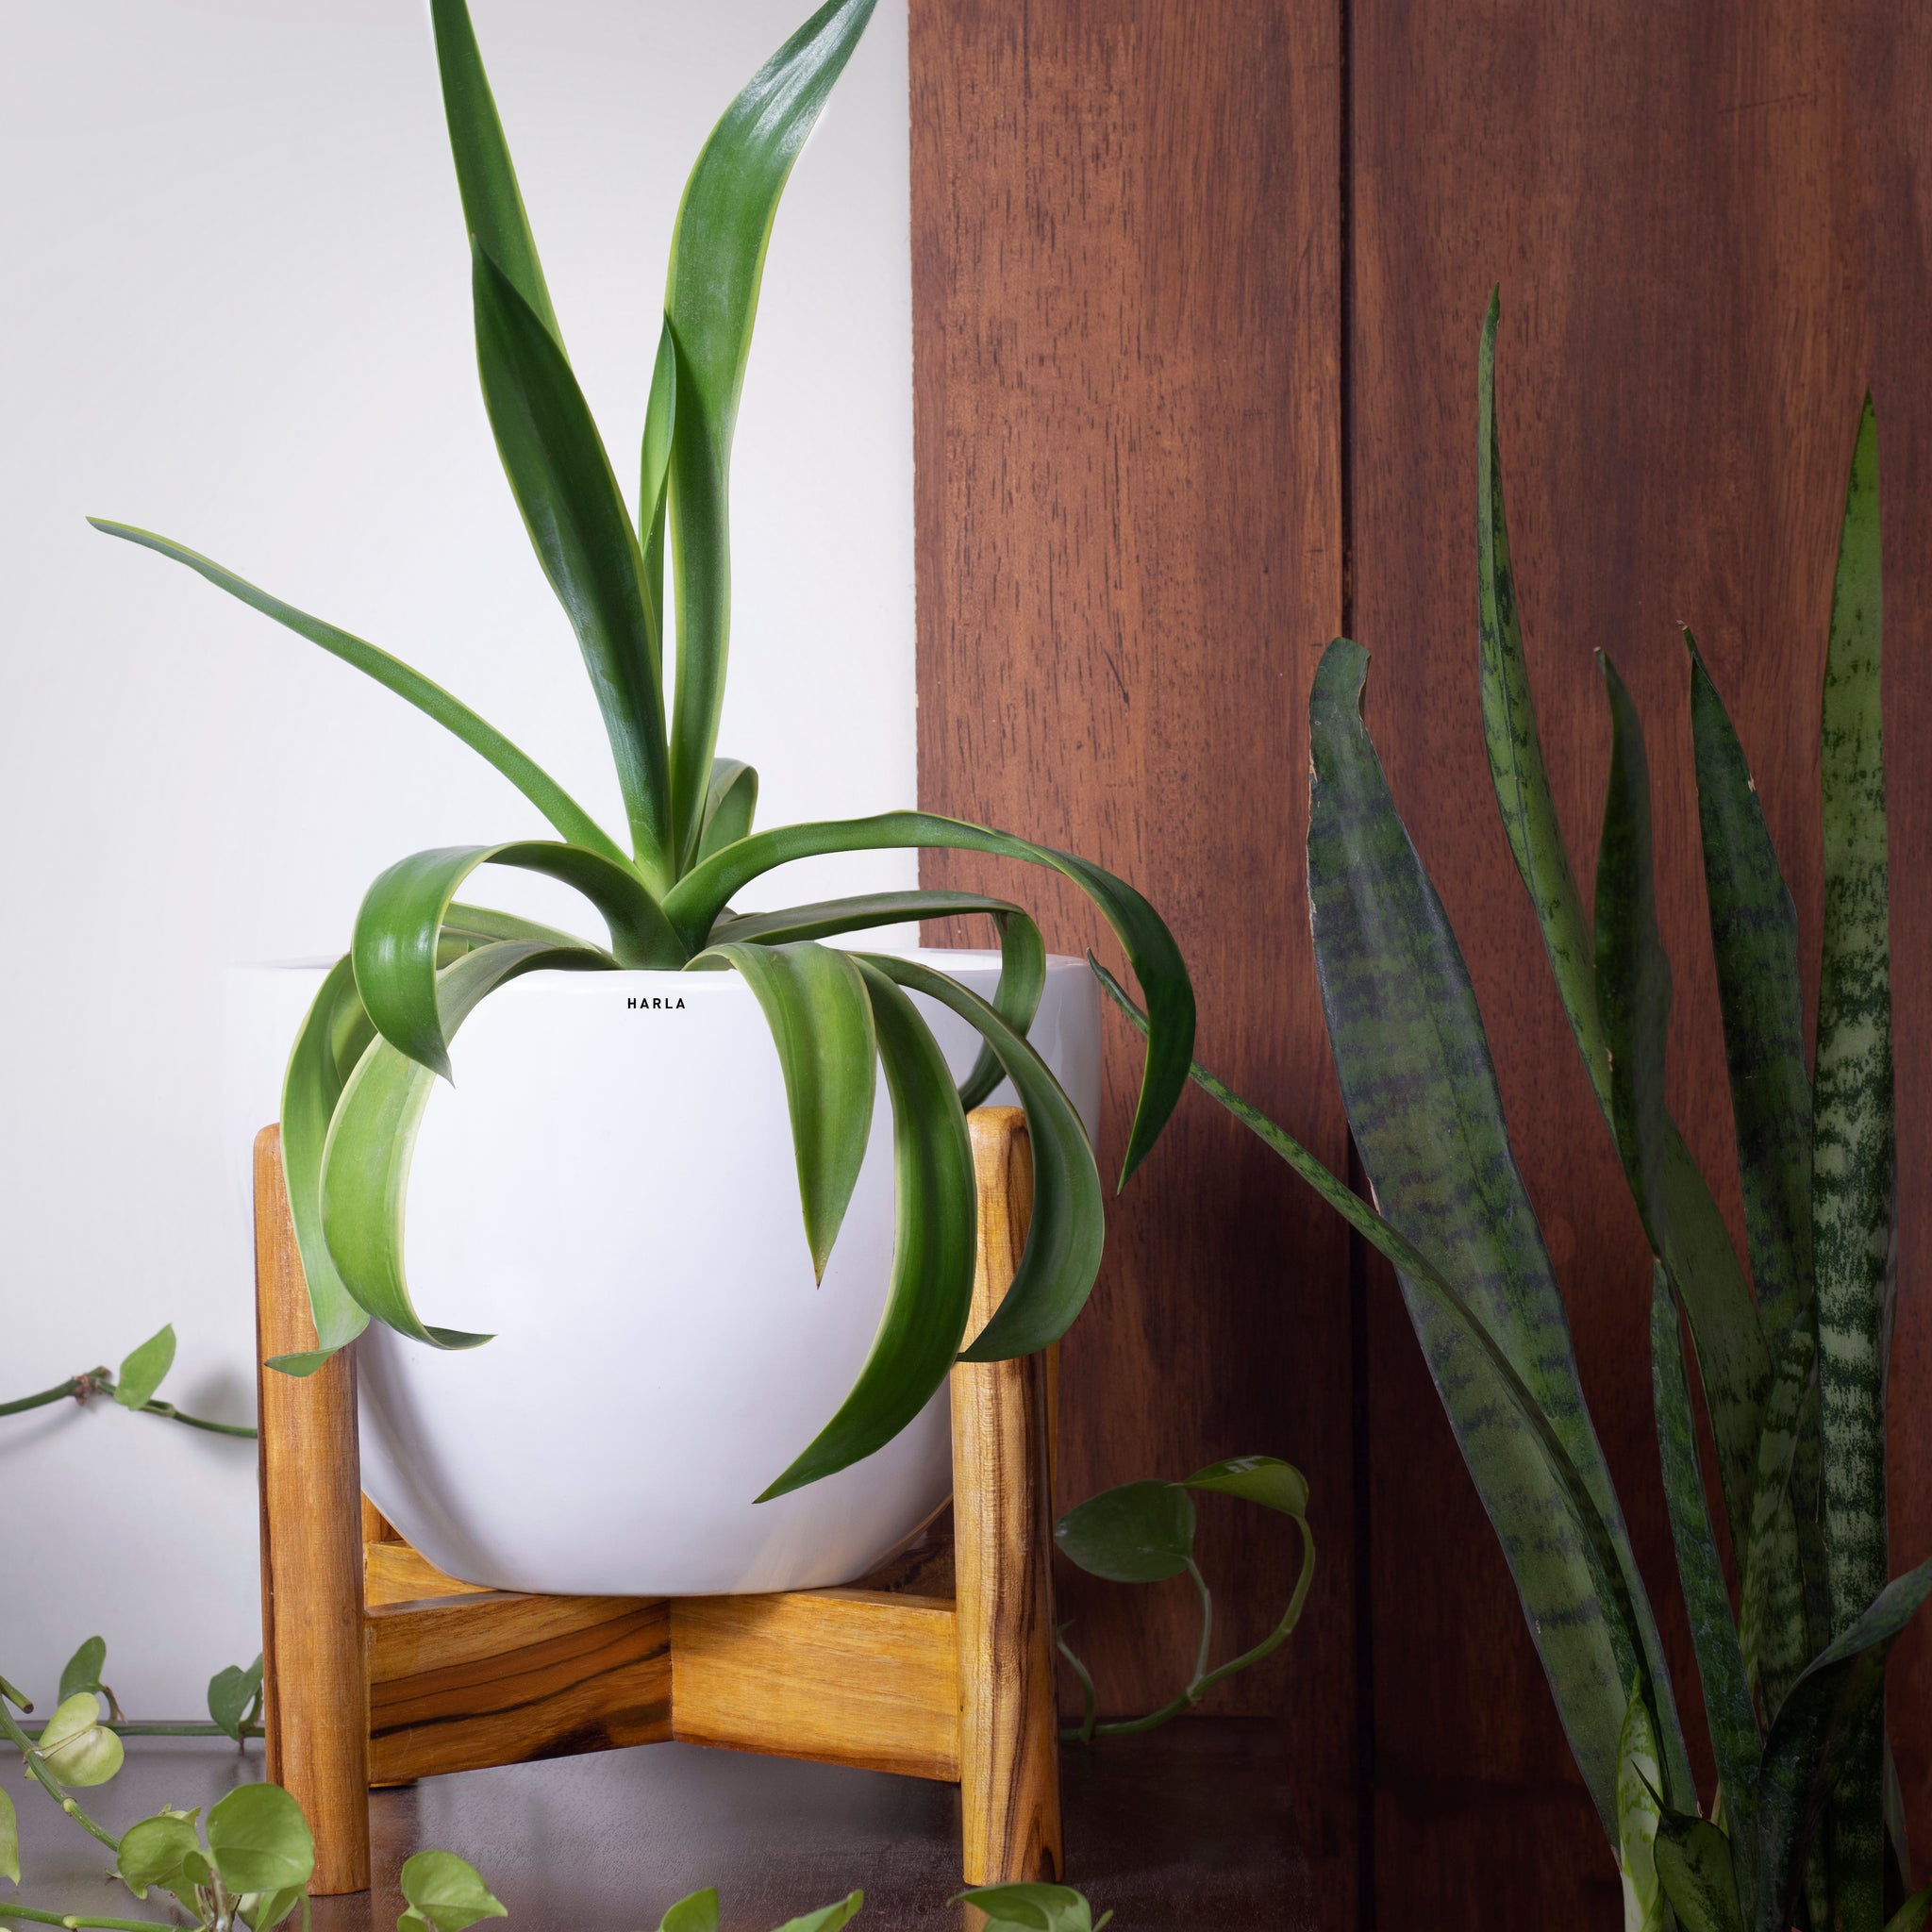 Large size Echoing Eternity-Fat Ceramic planter in white color with wooden stand and plant in it.